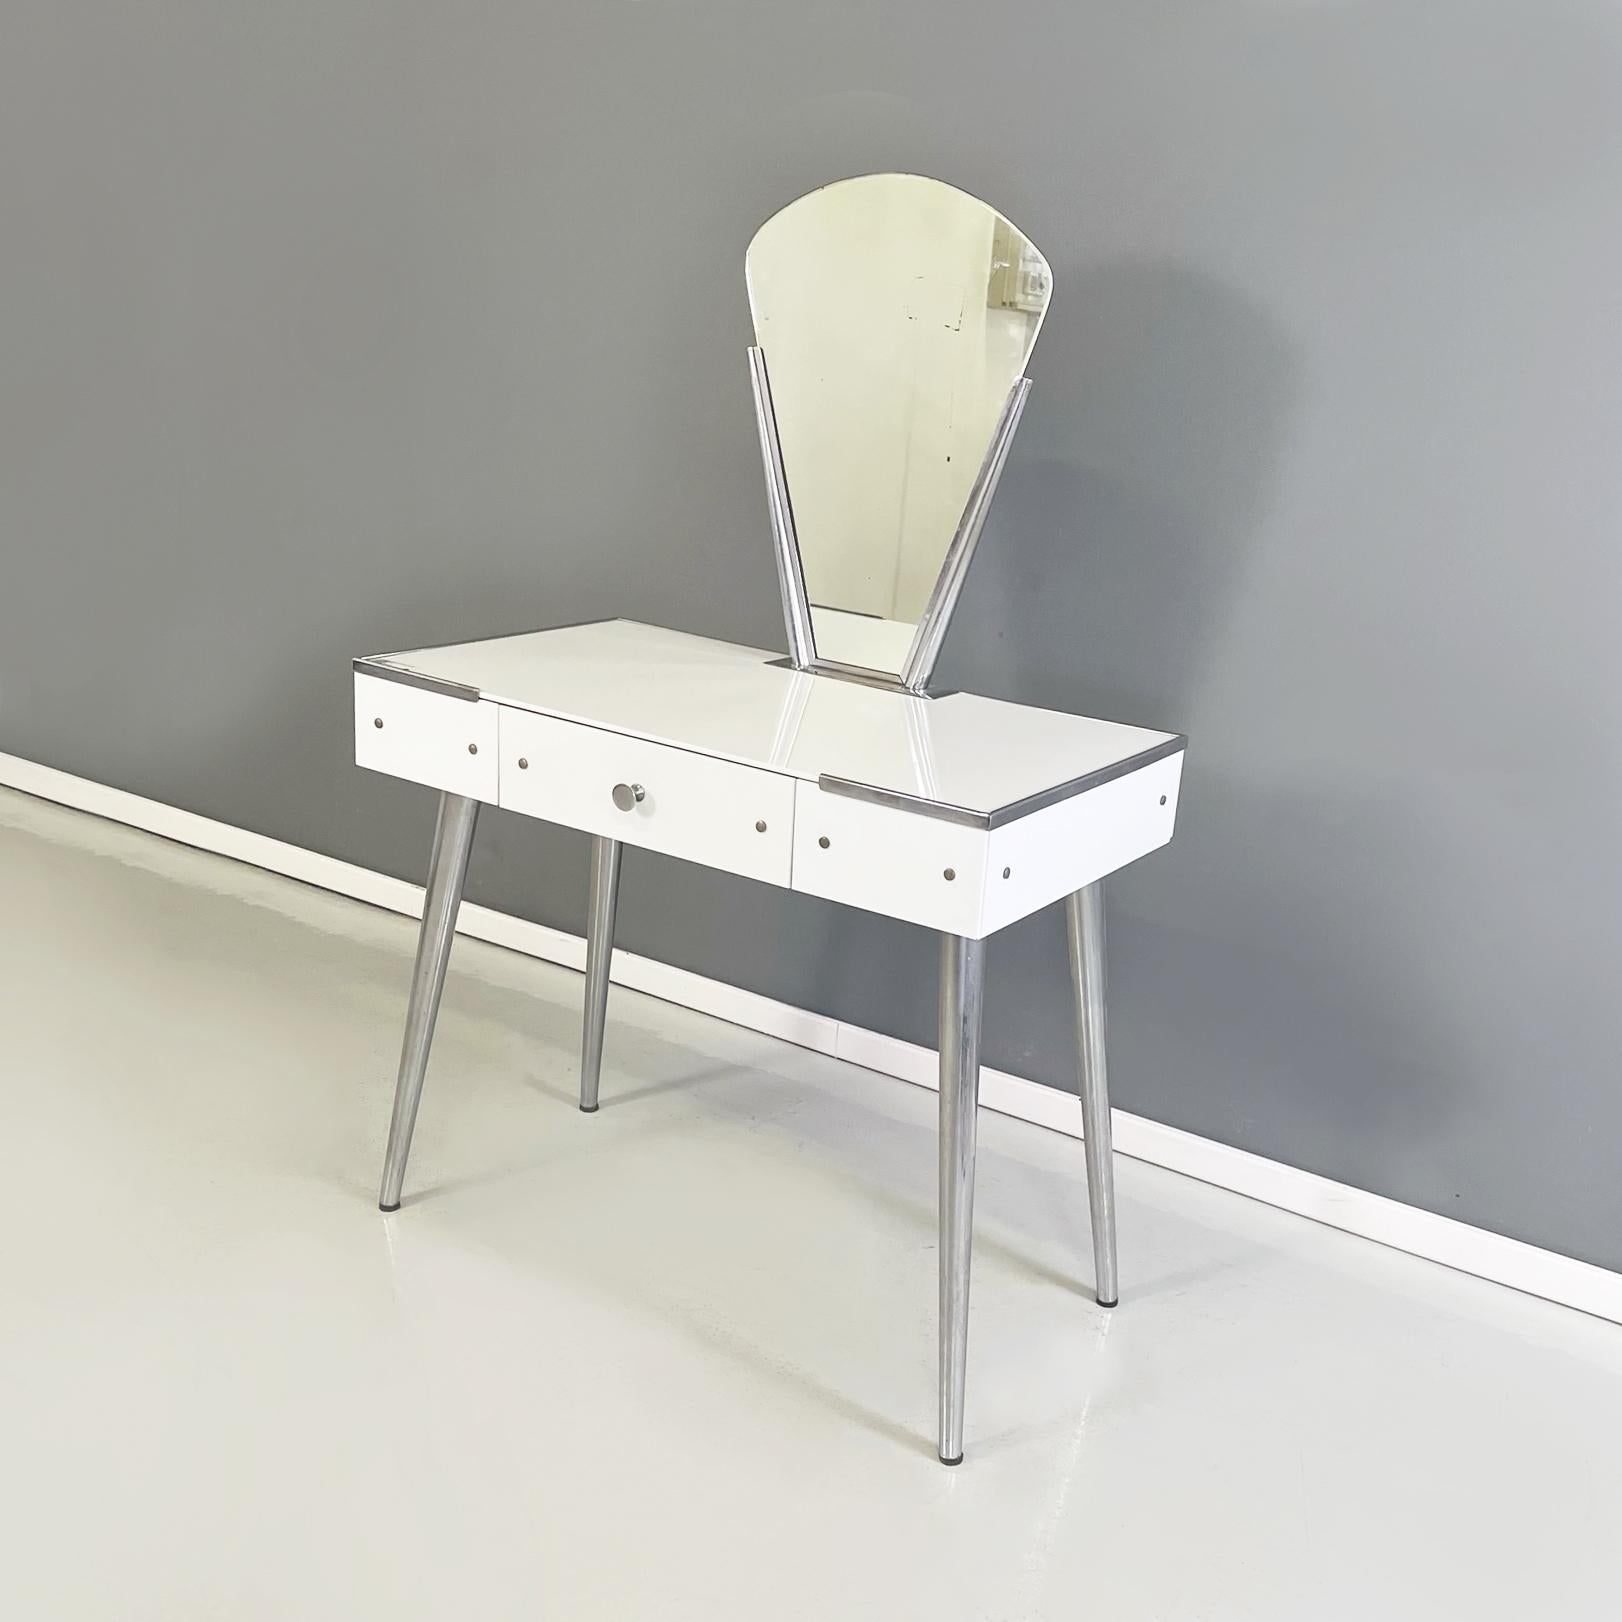 Italian mid-century Console with mirror in opaline glass and steel by Raimondi, 1953
Elegant and vintage console with rectangular top covered in opaline glass with steel details. It features a make-up mirror with rounded shapes and a steel